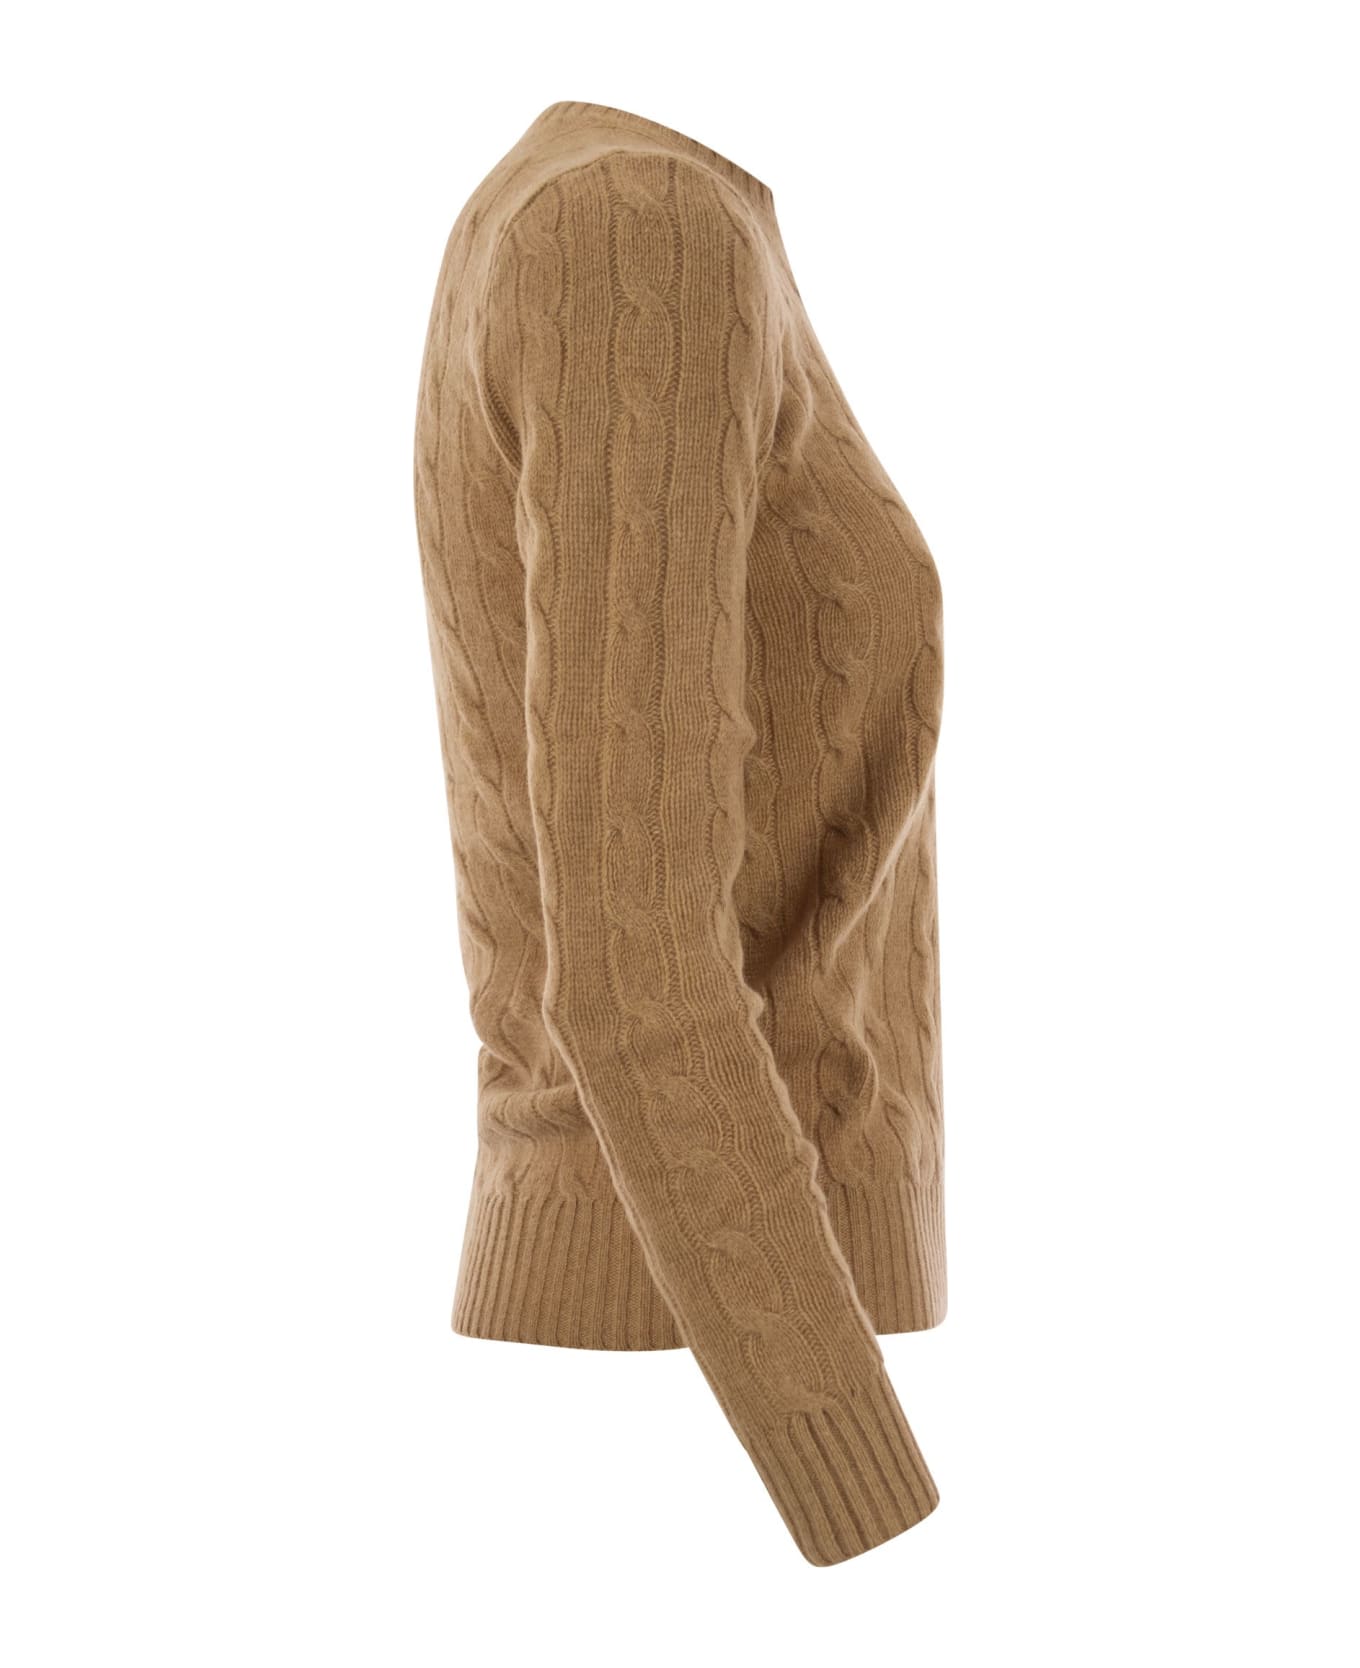 Polo Ralph Lauren Camel Mél Collection Wool And Cashmere Braided Sweater - Camel